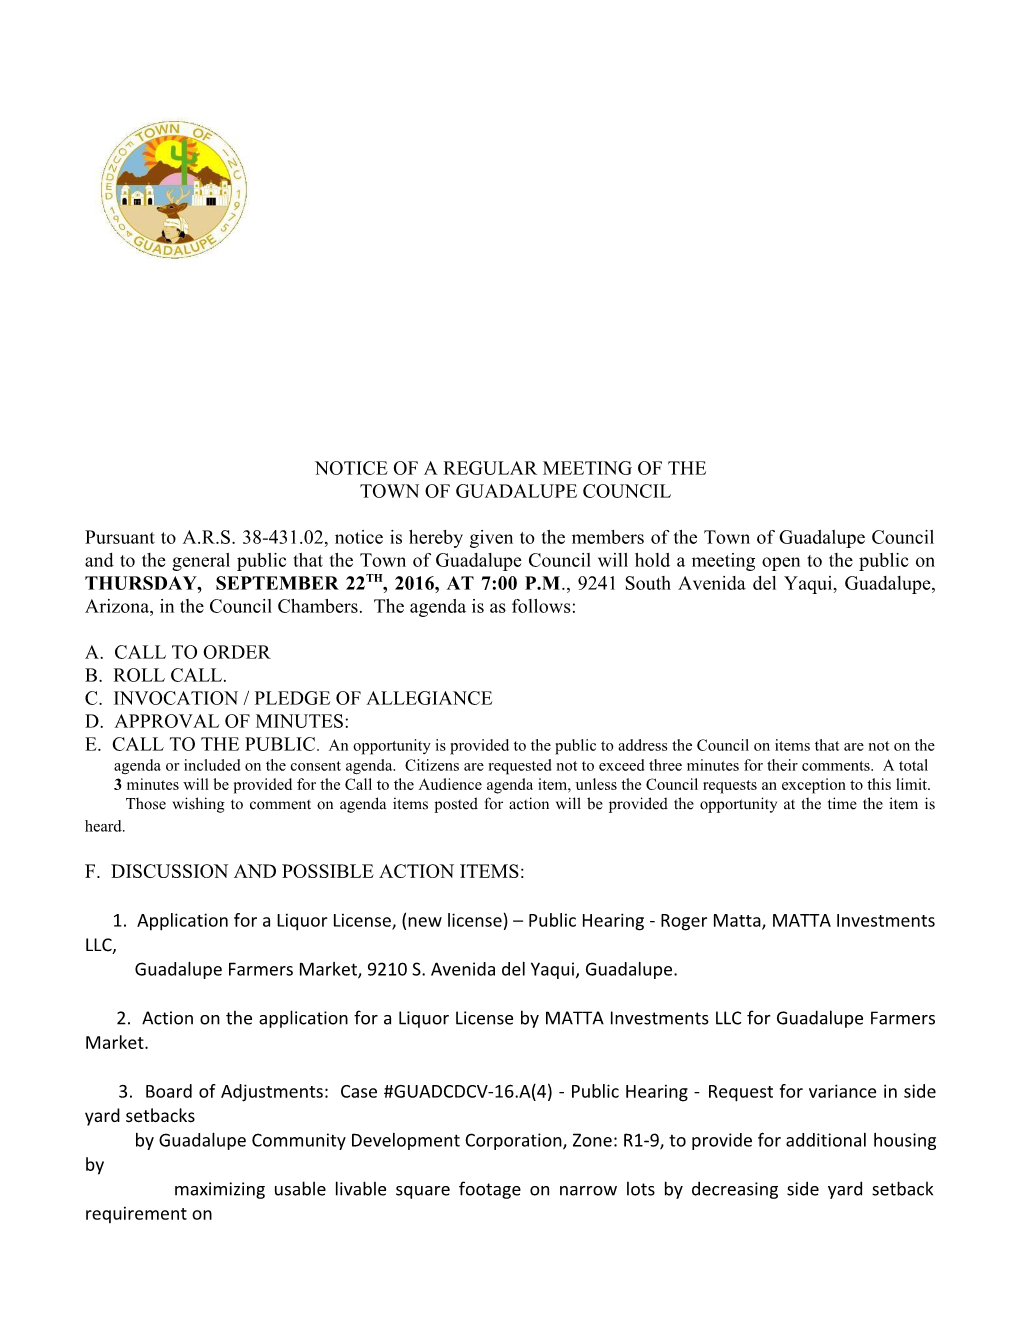 Notice of a Regular Meeting of The